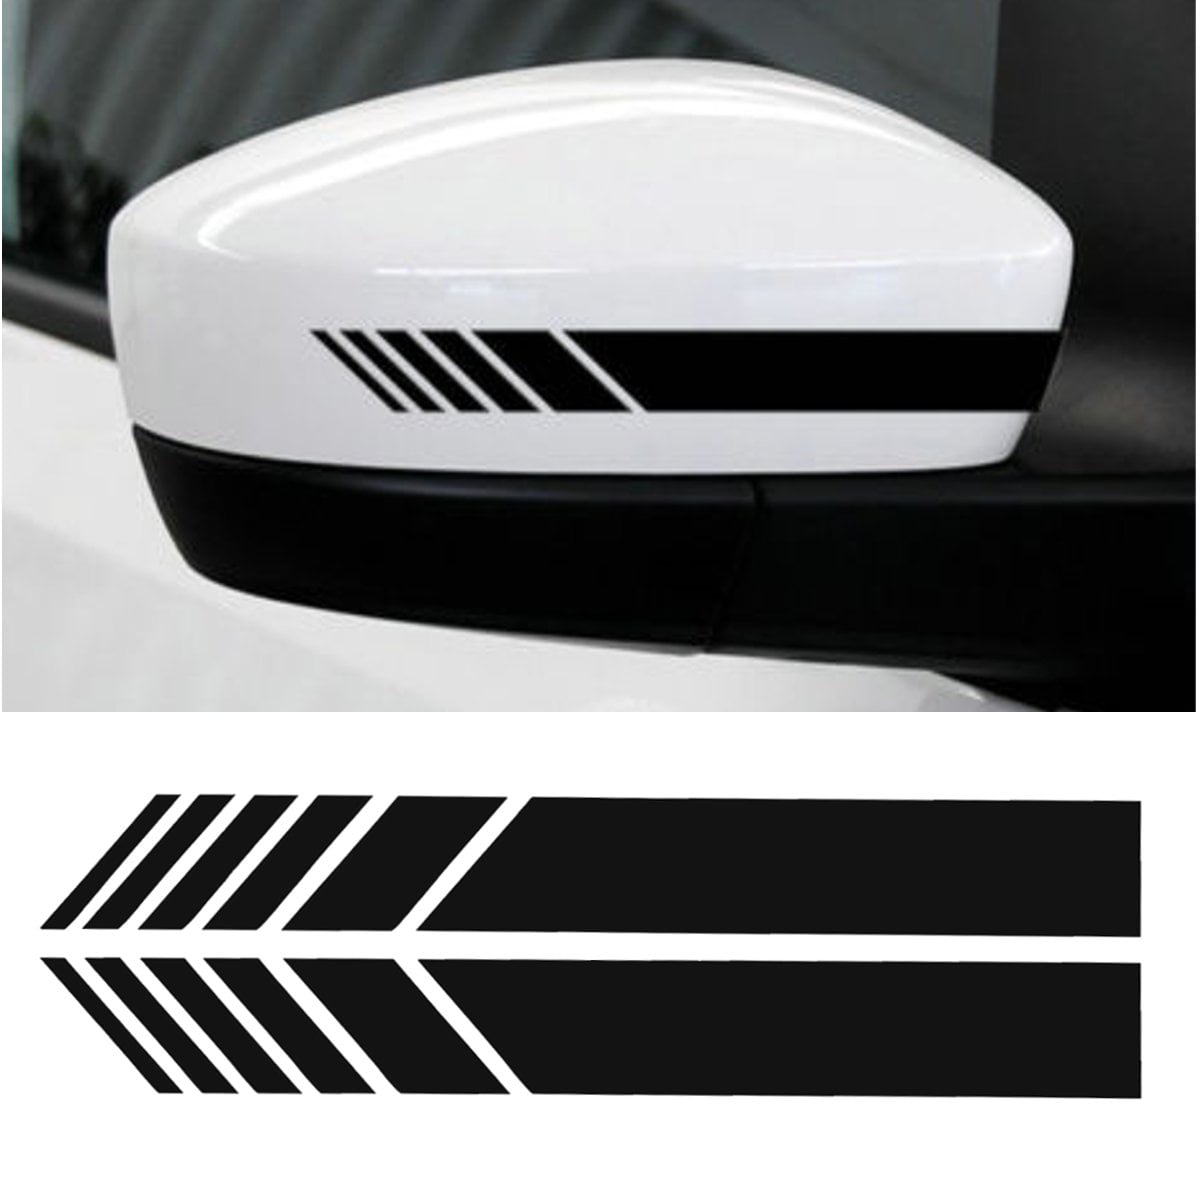 Blue Autodomy Car Rearview Mirror Stickers with Stripes Fringes Design Pack 6 units with different widths for Car